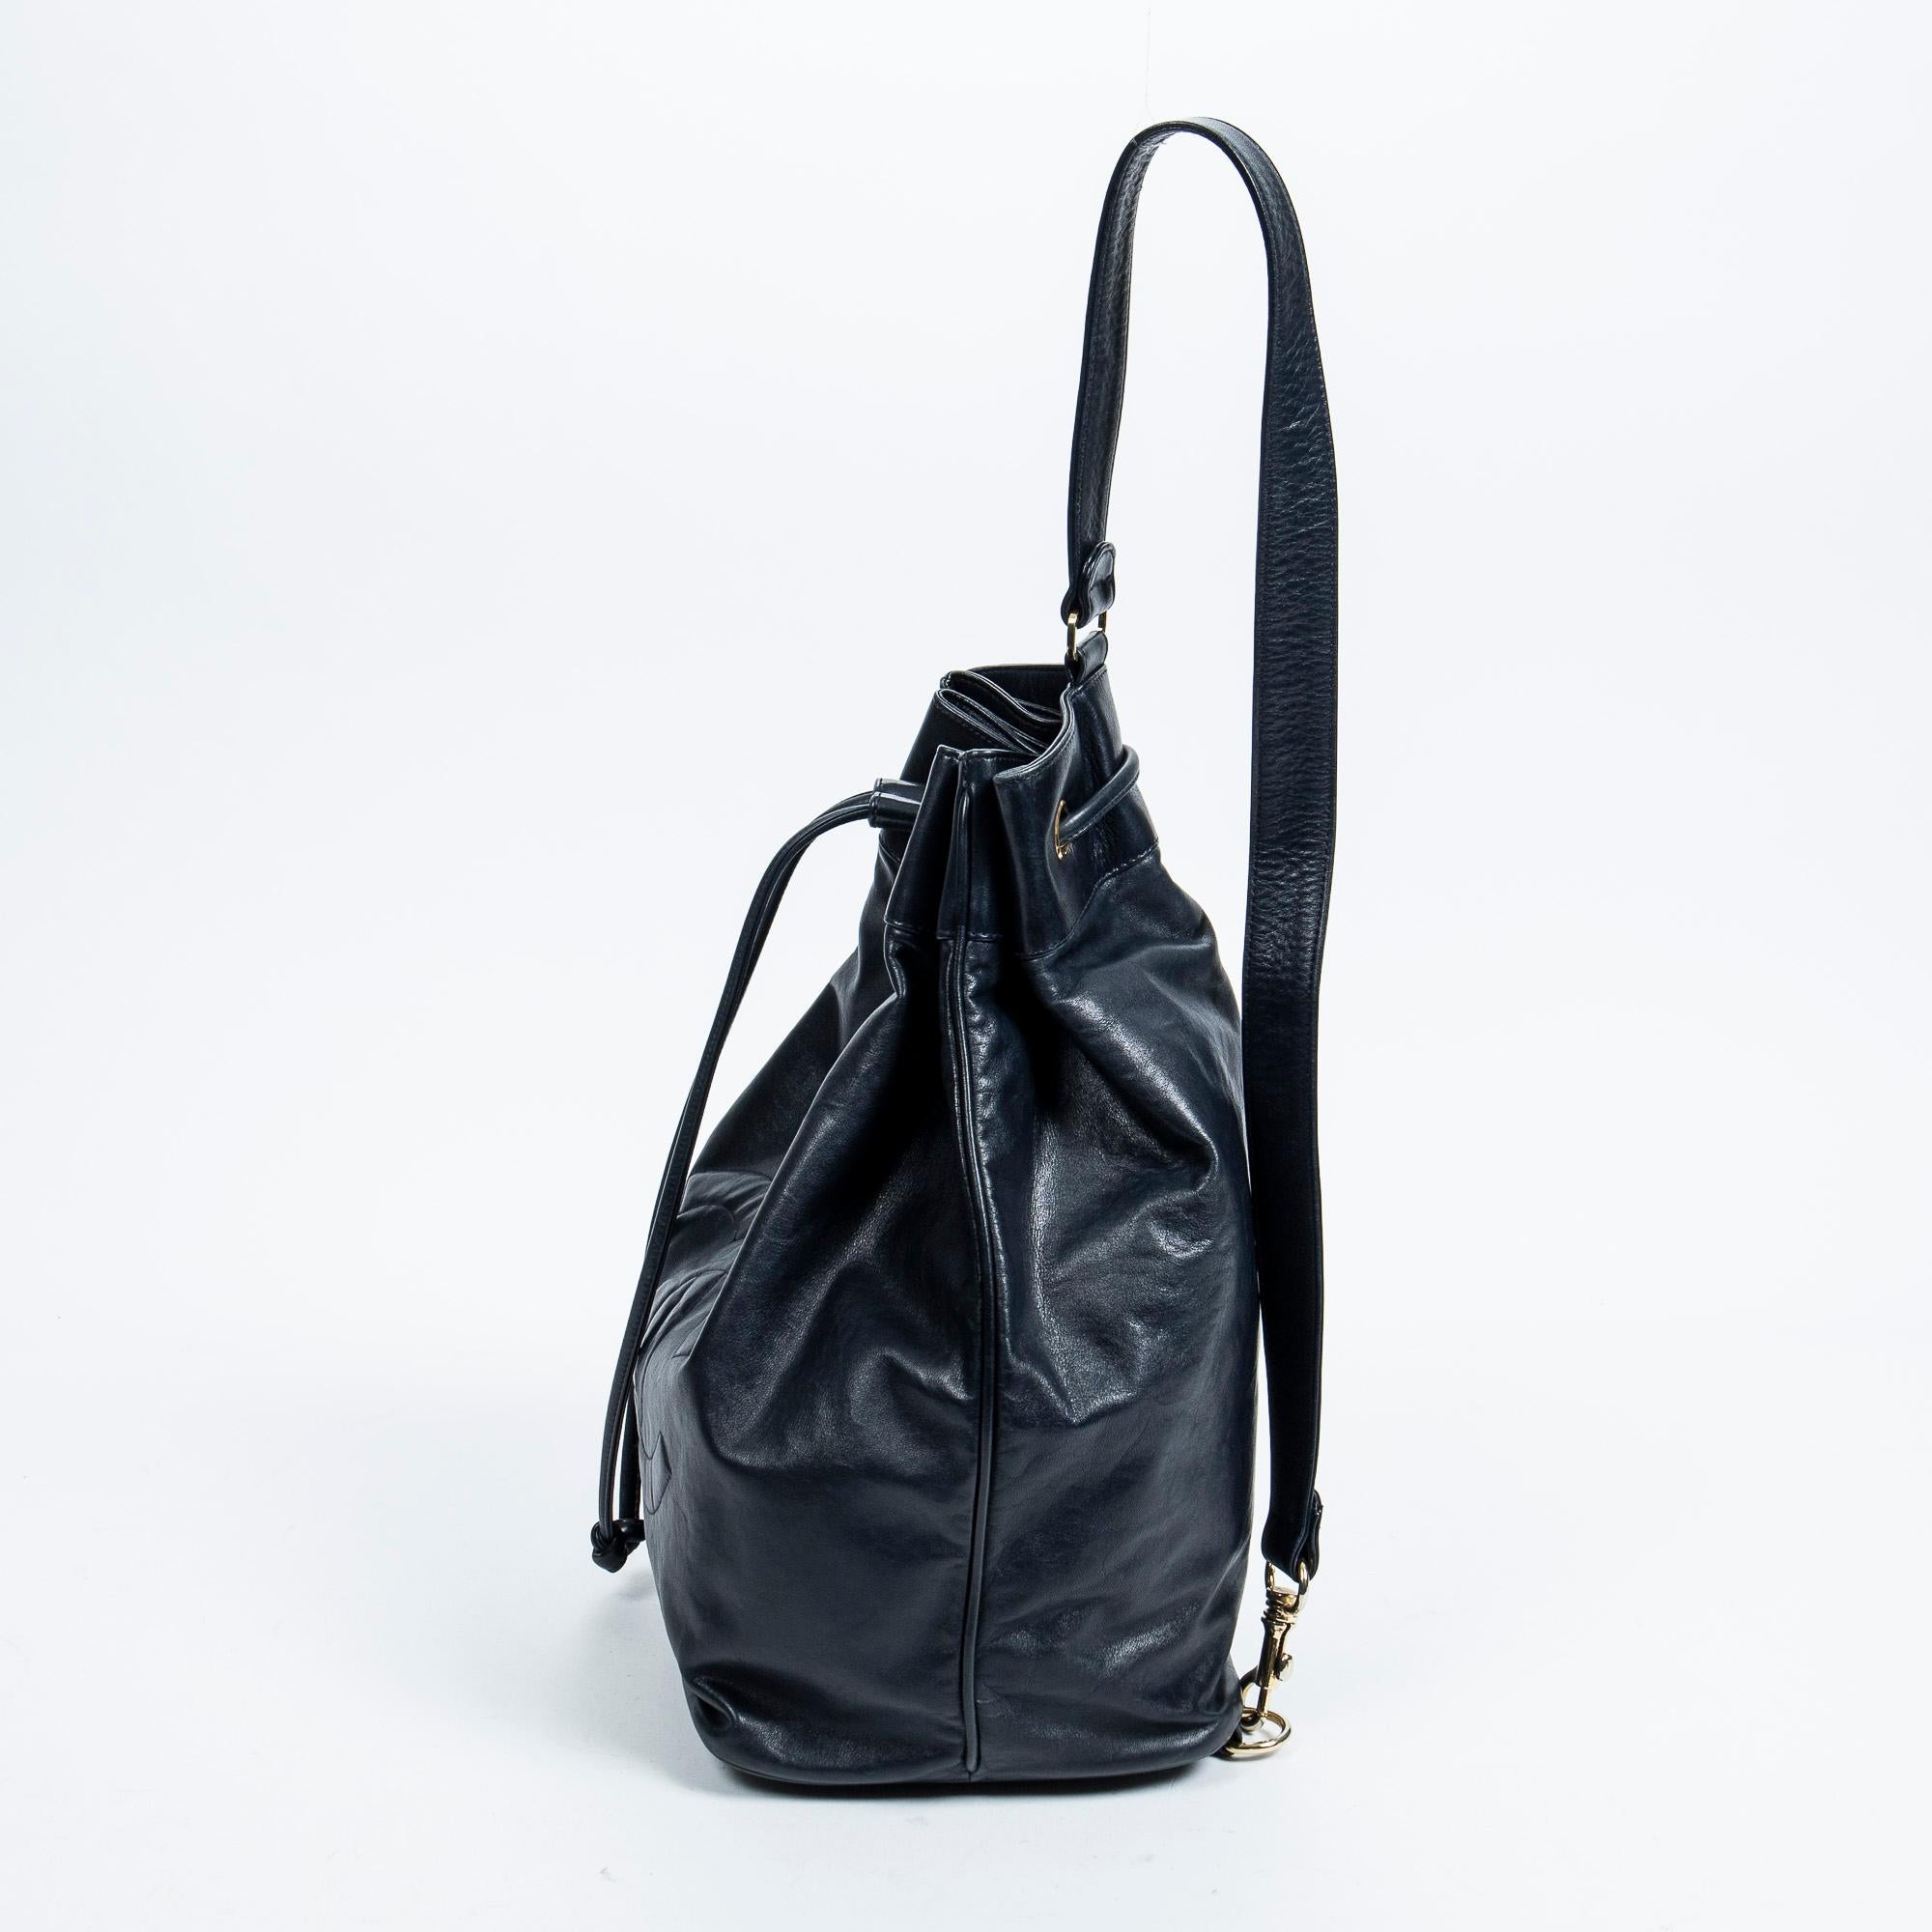 Introducing the Chanel Navy Vintage CC One Shoulder Backpack: a chic companion for urban adventures. Crafted from luxurious lambskin leather in a timeless navy hue, this backpack boasts gleaming gold hardware. Its convenient drawstring closure opens